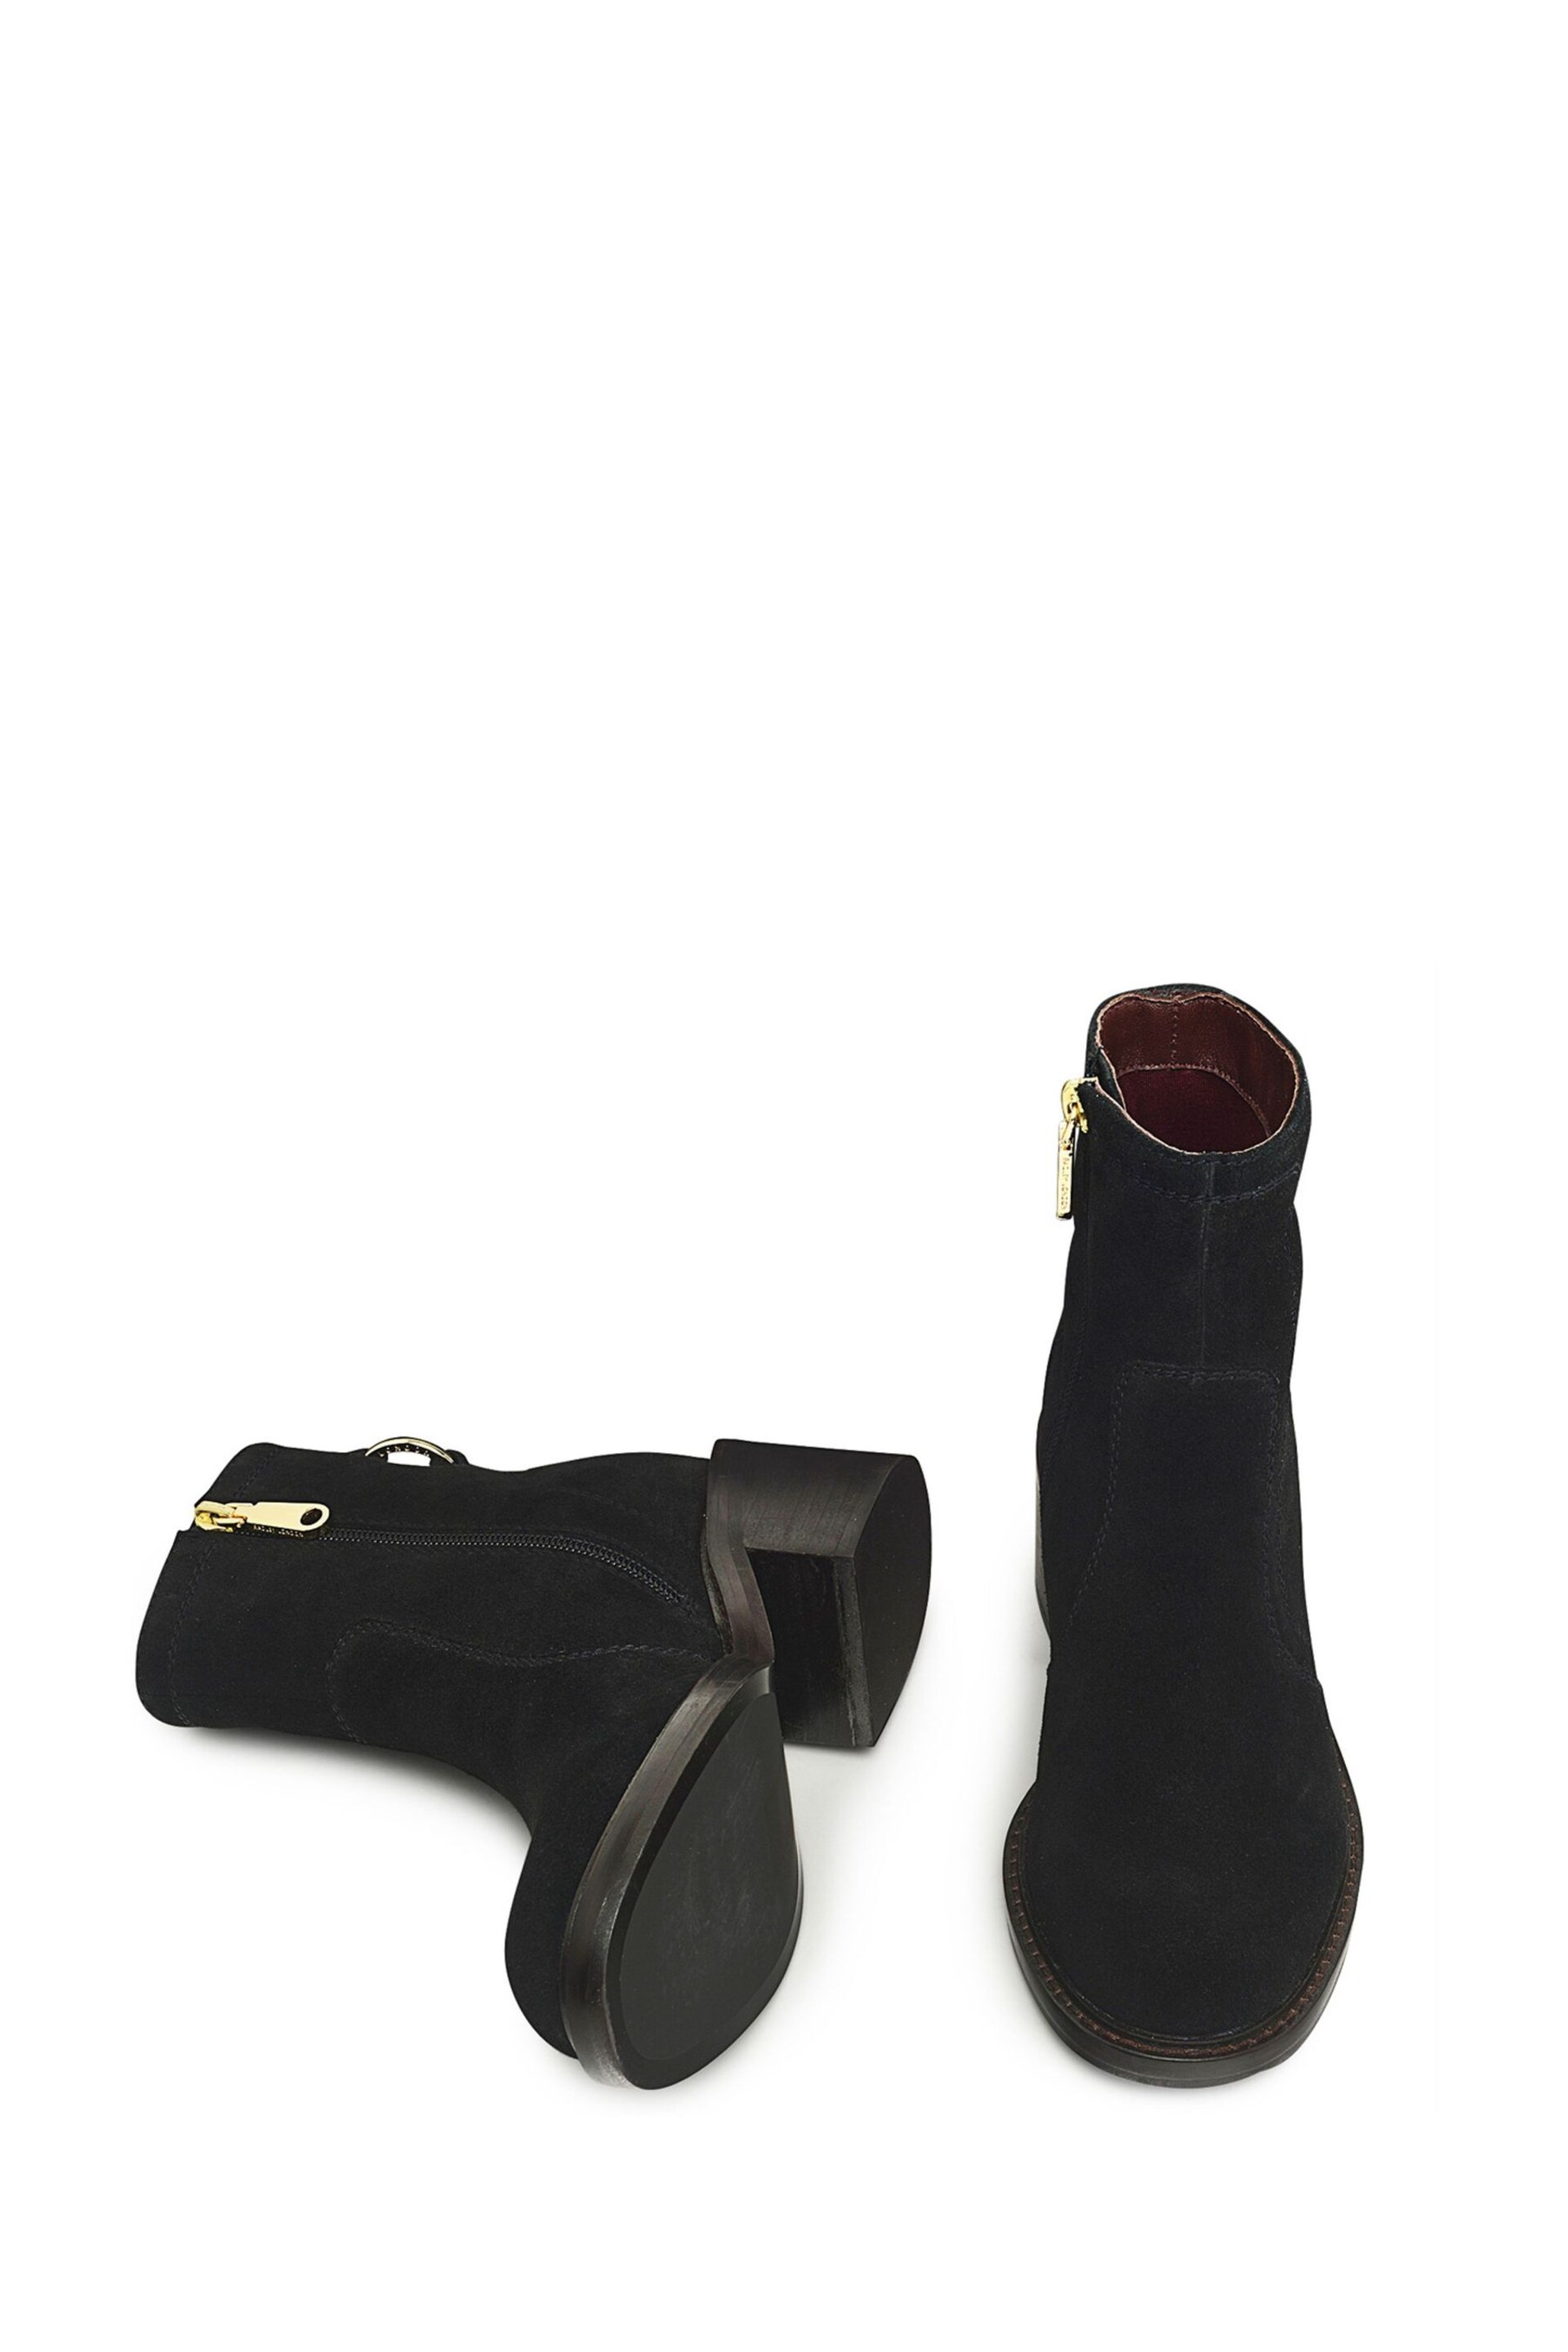 Radley London New Street Suede Jeans Black Boots - Image 3 of 3